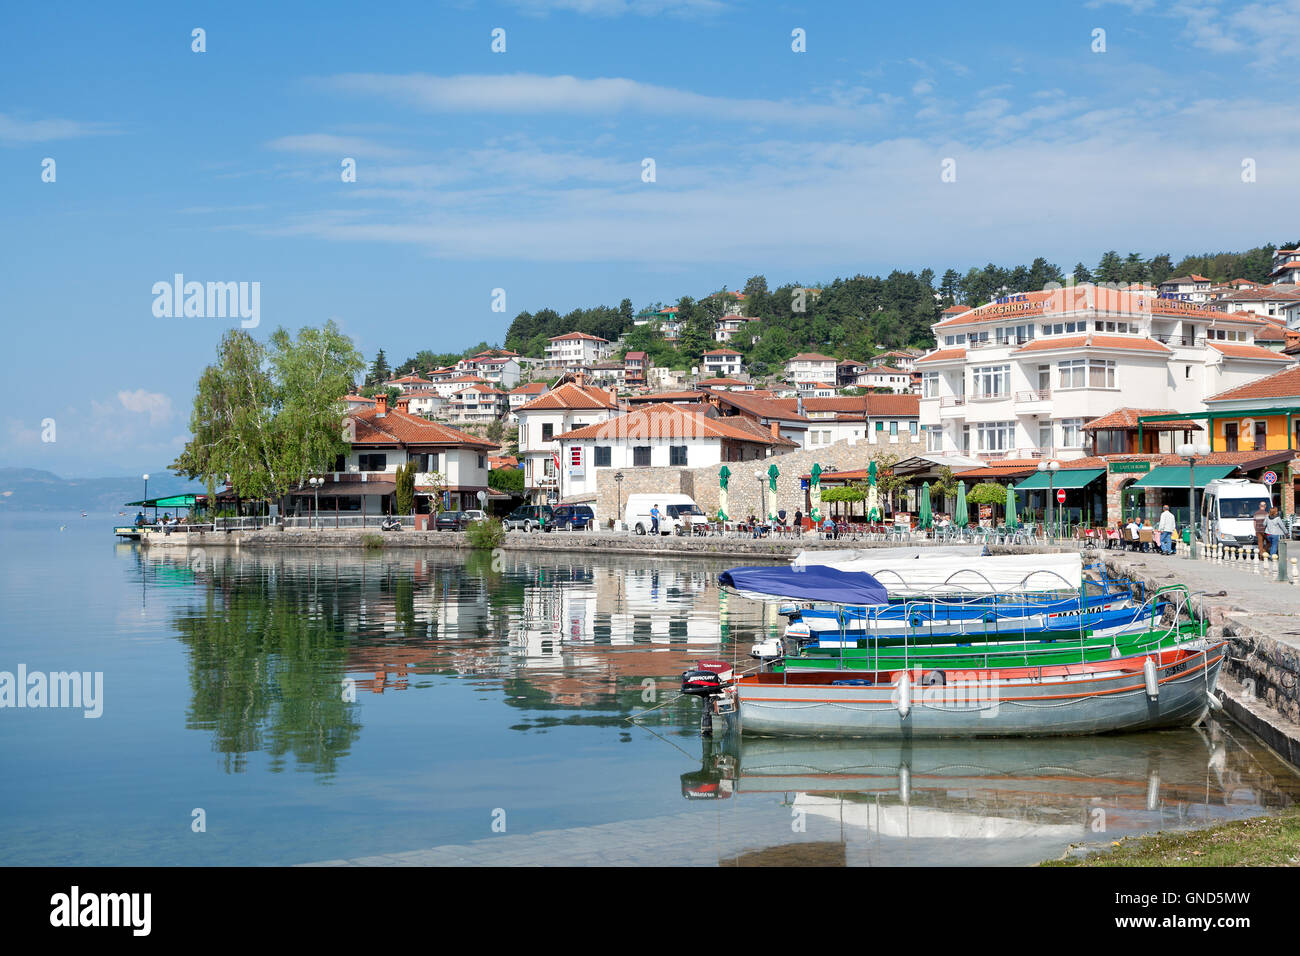 Ohrid, Macedonia - May 9, 2016 : Fishing boats on the Lake Ohrid with old town in the background. Stock Photo